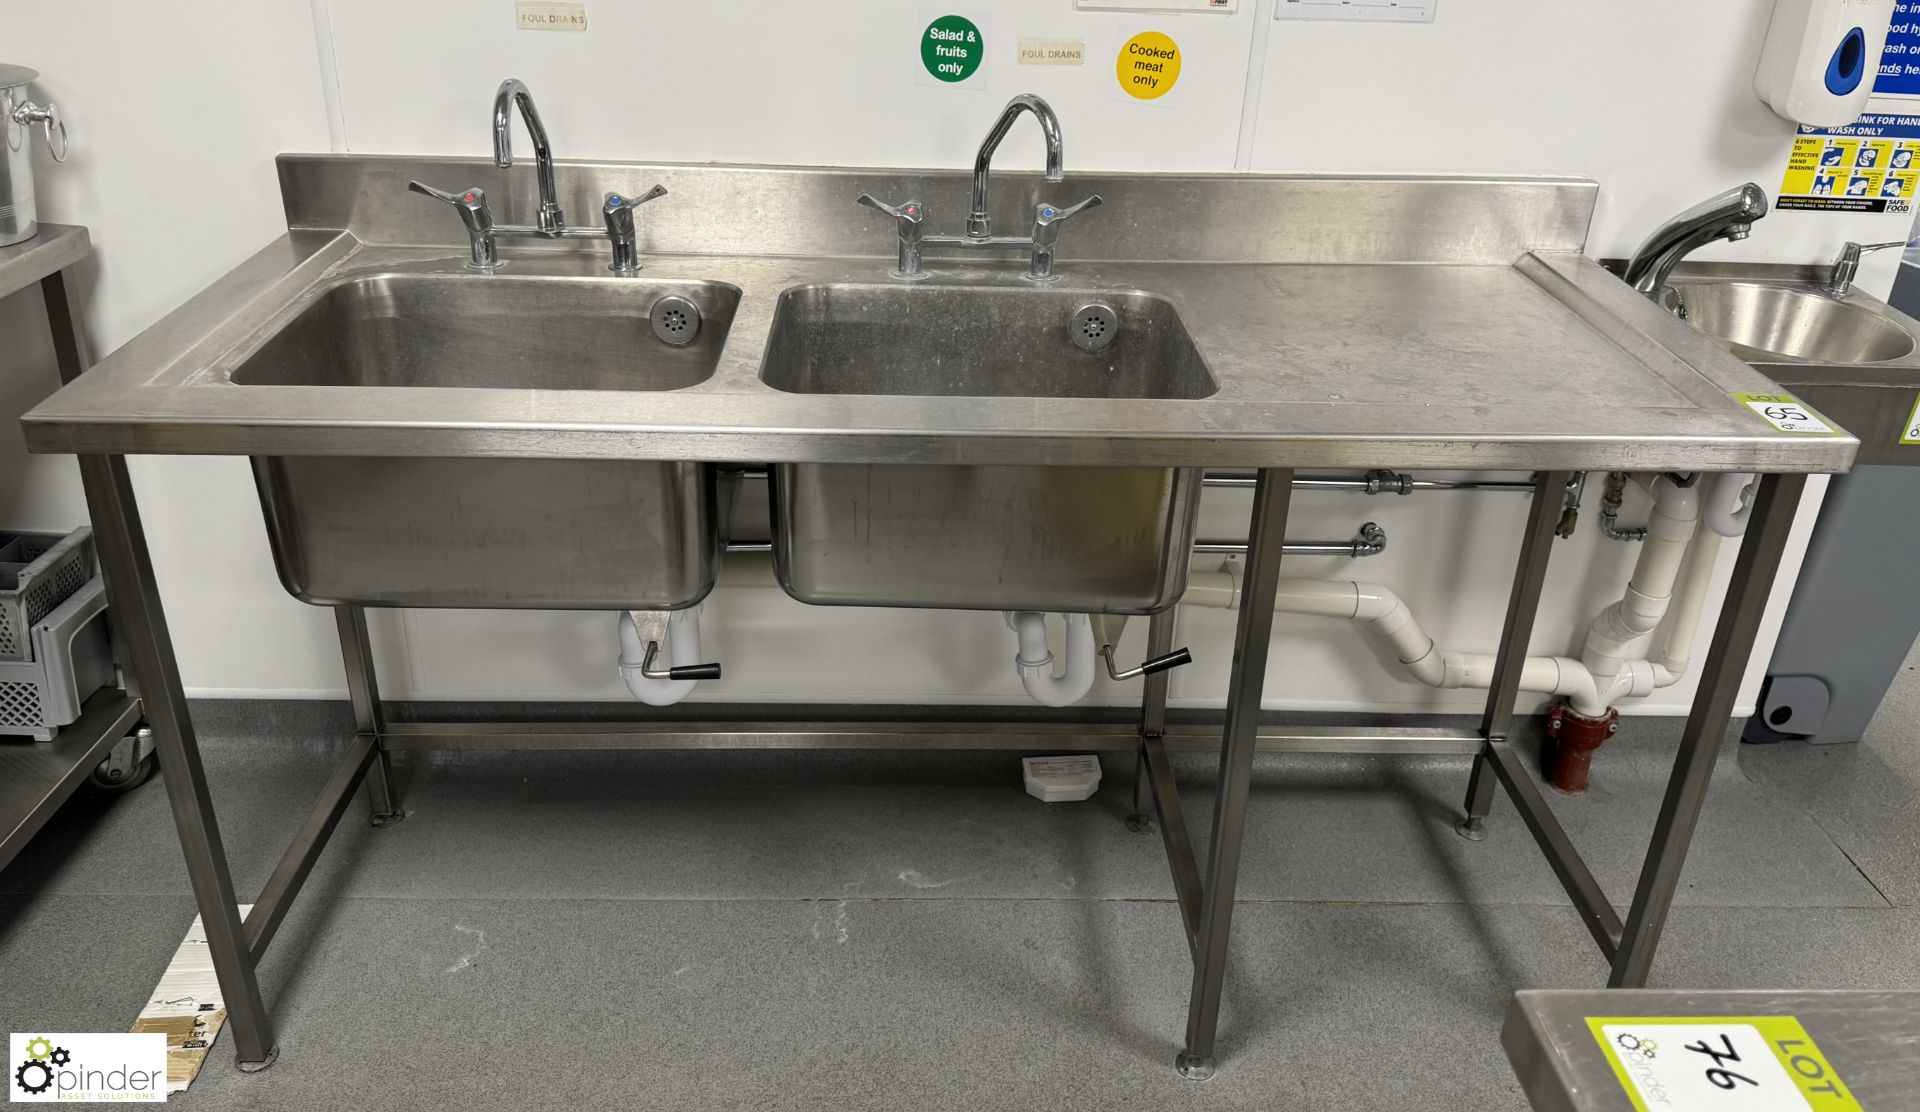 Stainless steel twin bowl Sink, 1800mm x 700mm x 900mm (location in building – basement kitchen 2)